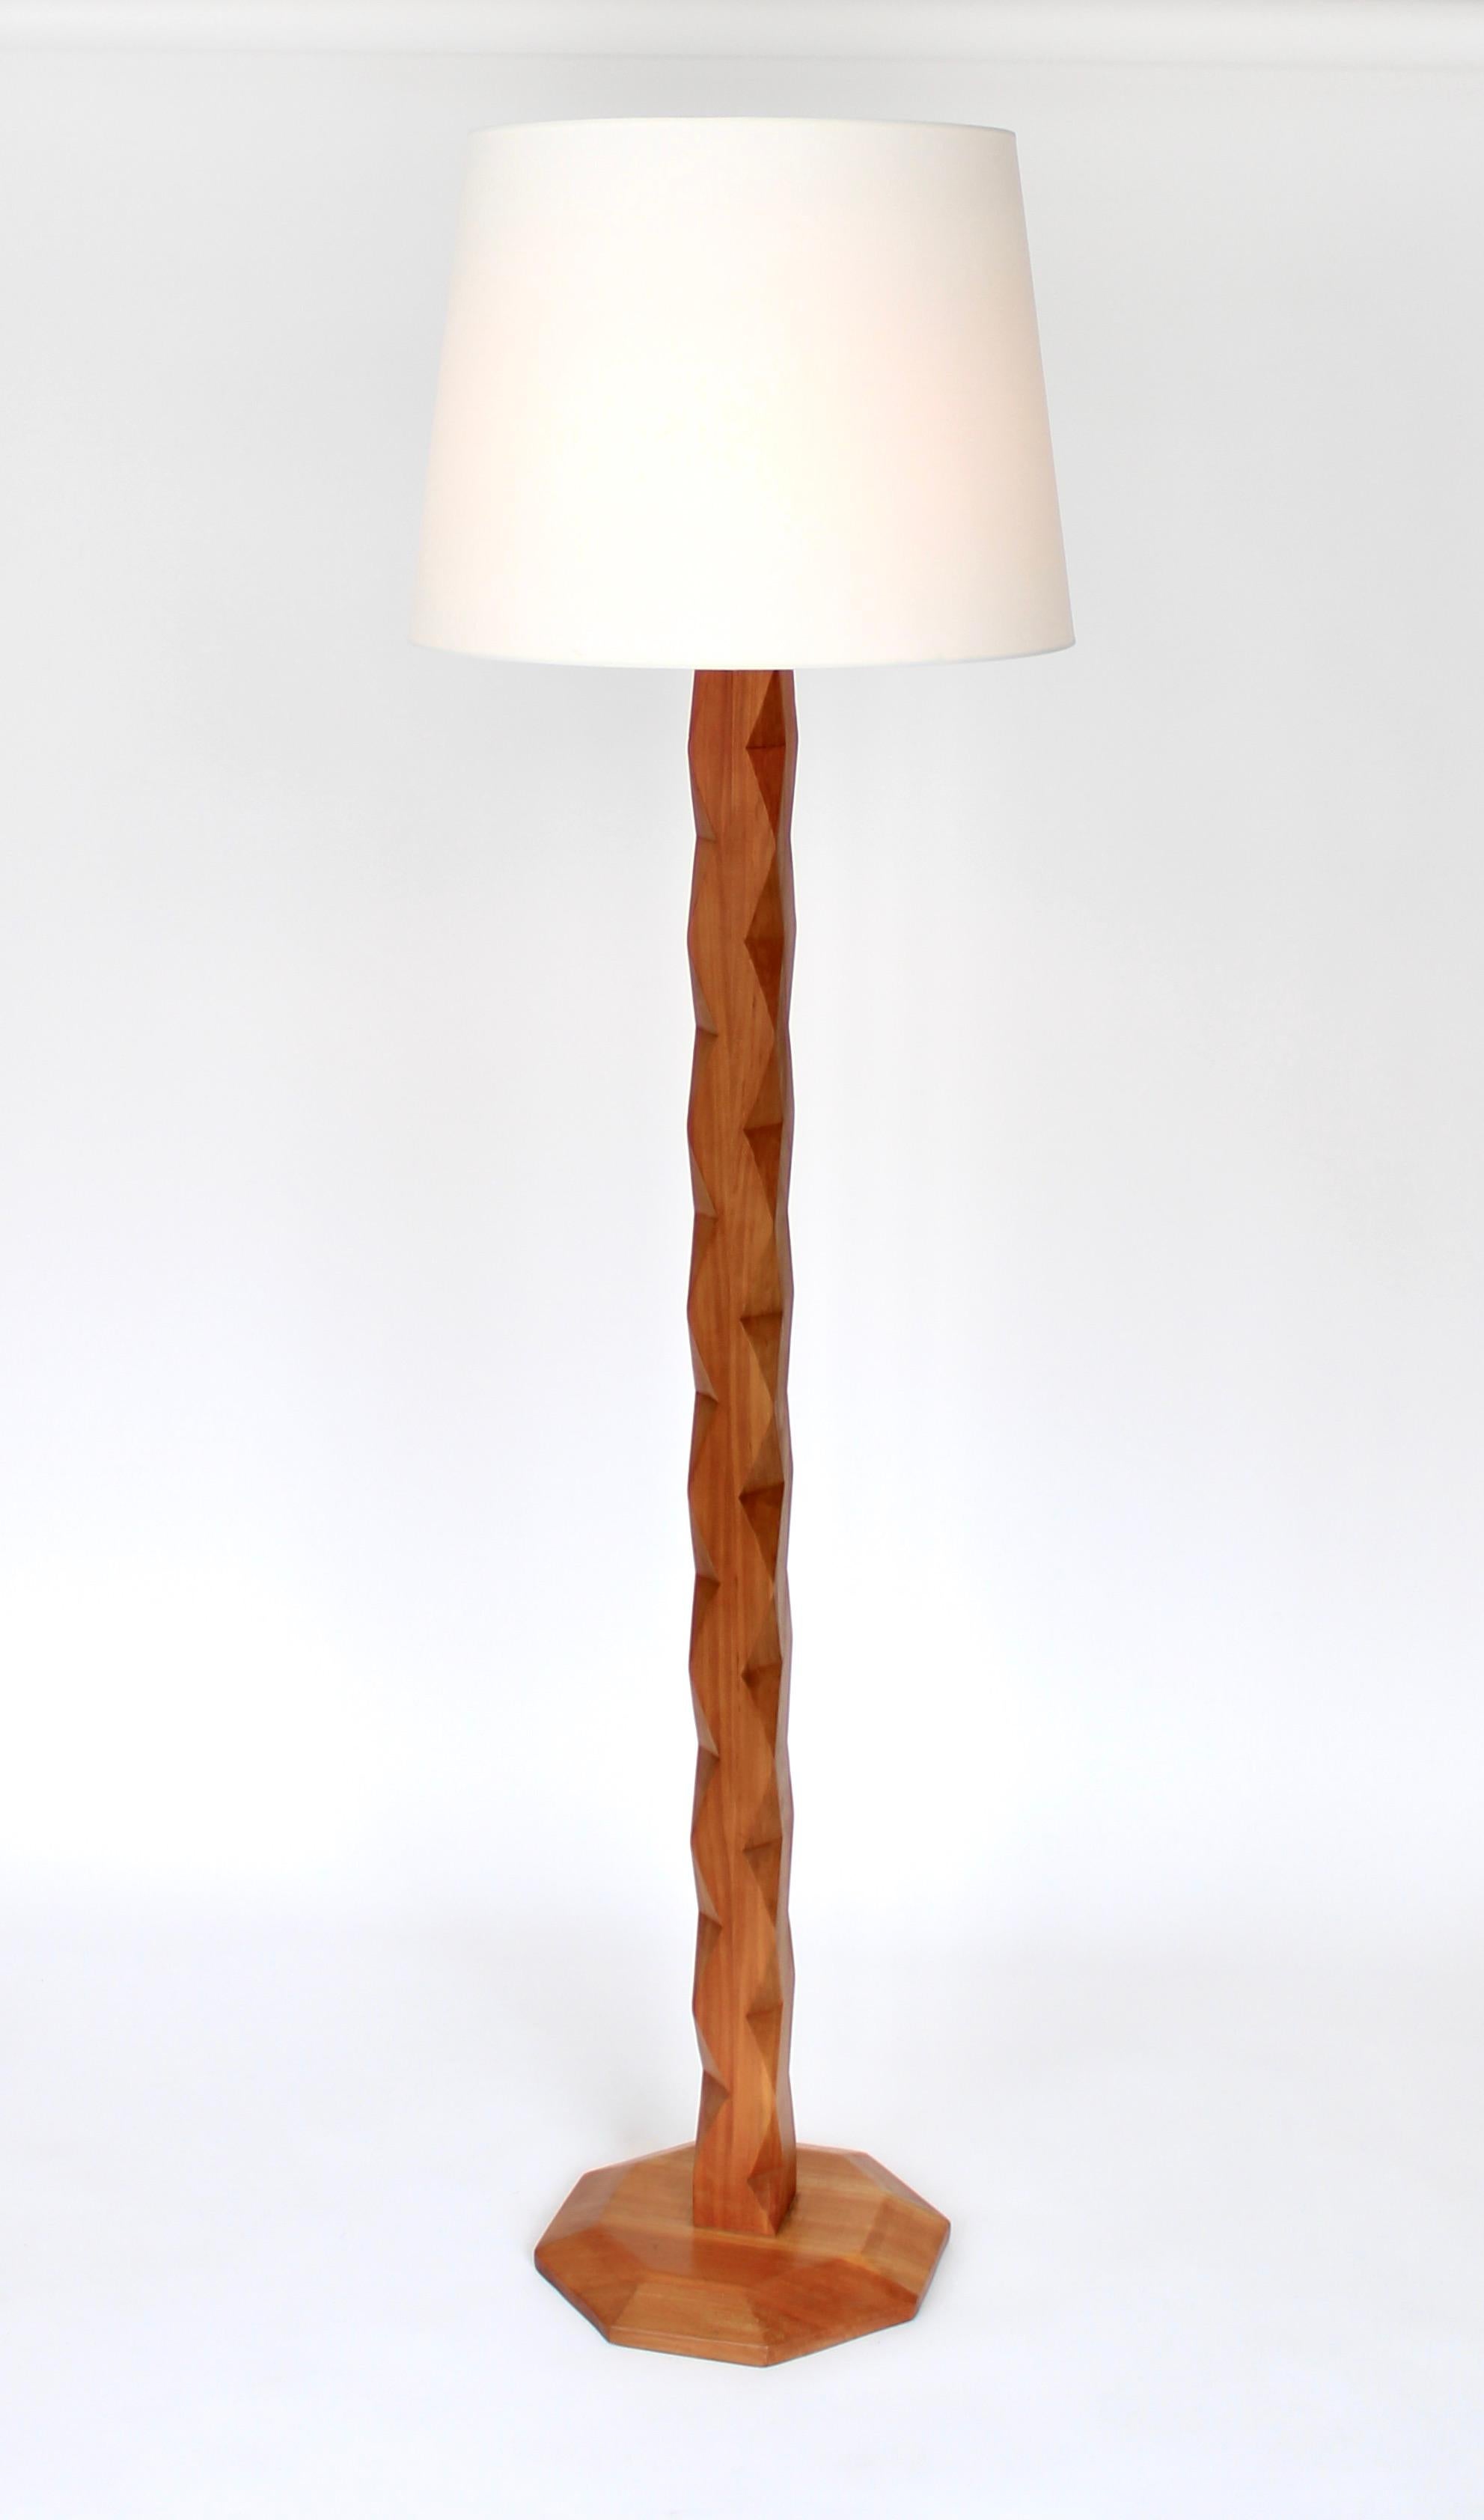 French unique carved elm wood floor lamp with sculptural faceted sides inspired by Constantin Brrancusi sculpture.
Sitting on a faceted octagonal Elm wood base. 
Unknown French designer and could be a piece unique. 
Newly rewired and new French